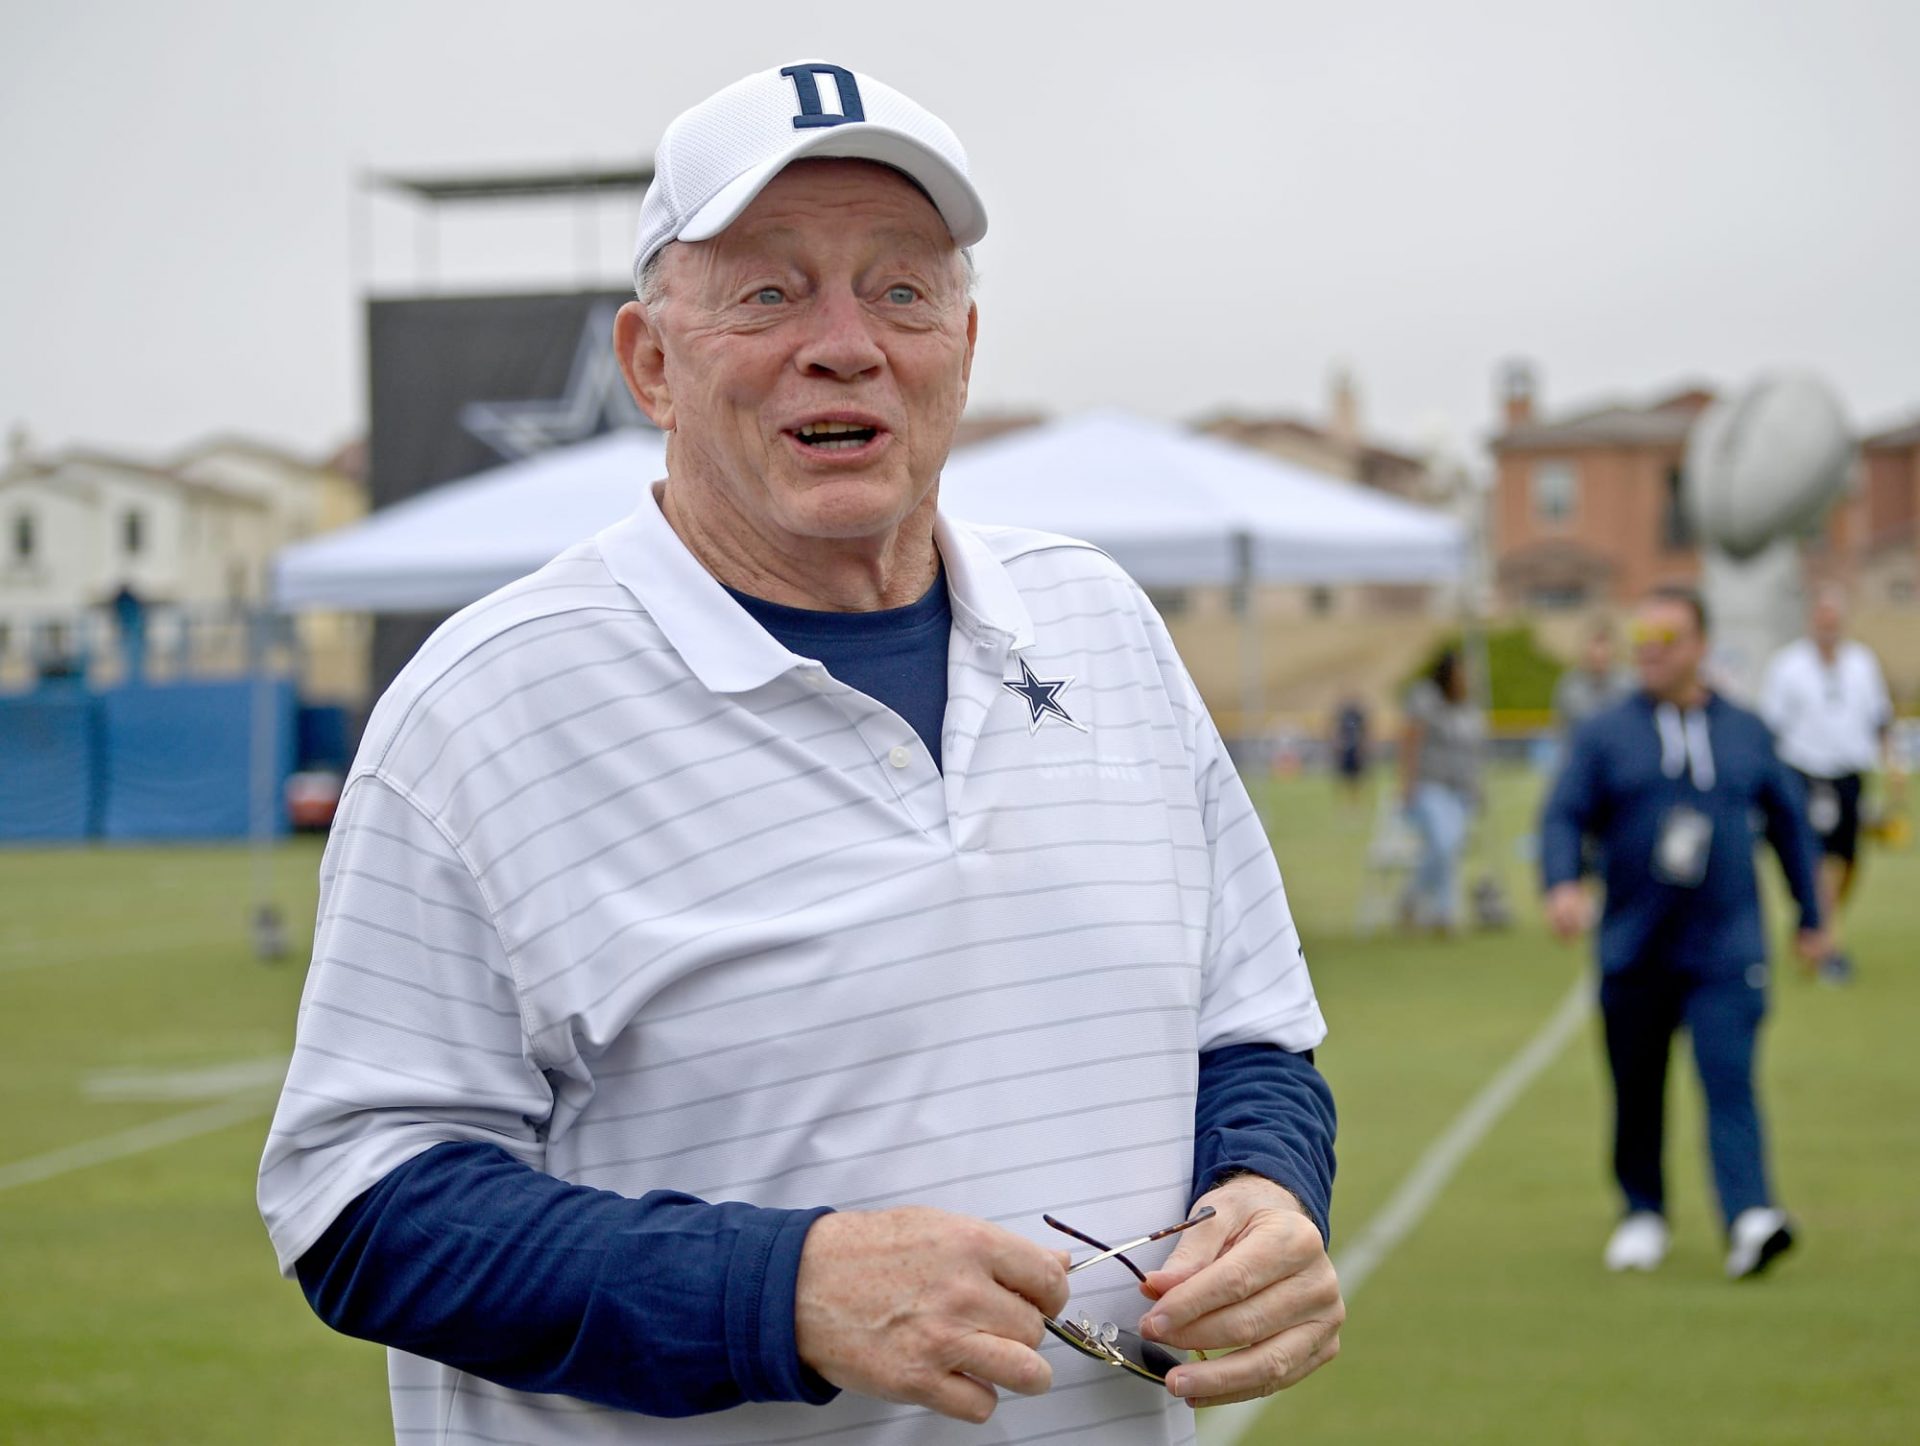 Cowboys owner Jerry Jones has an extremely right COVID-19 vaccine take